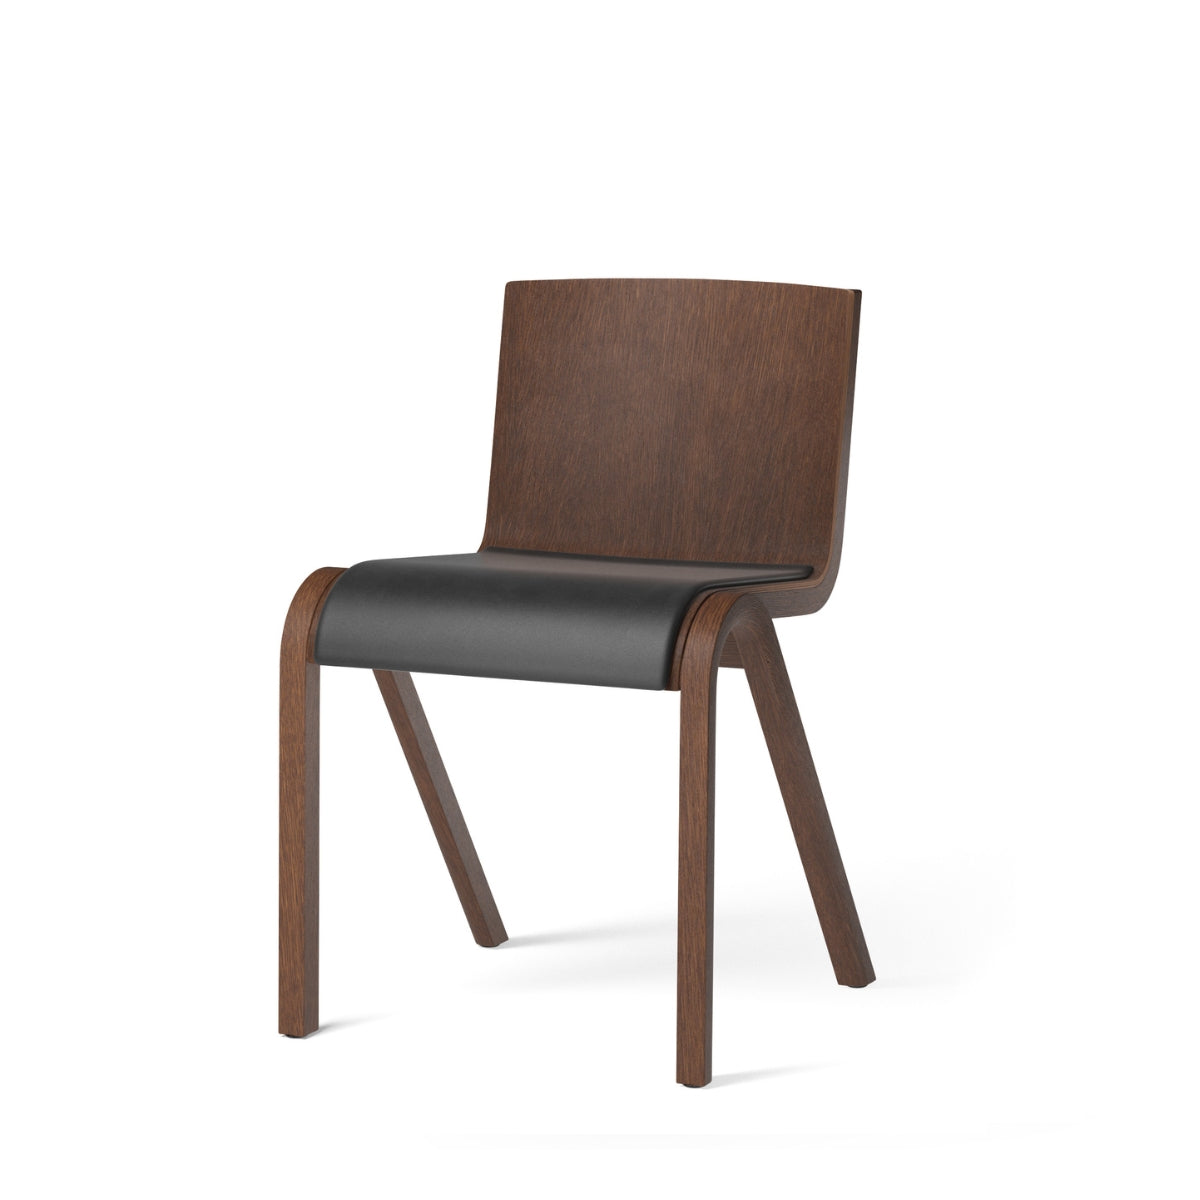 Audo Copenhagen | Ready Dining Chair – Upholstered Seat, Red Stained Oak